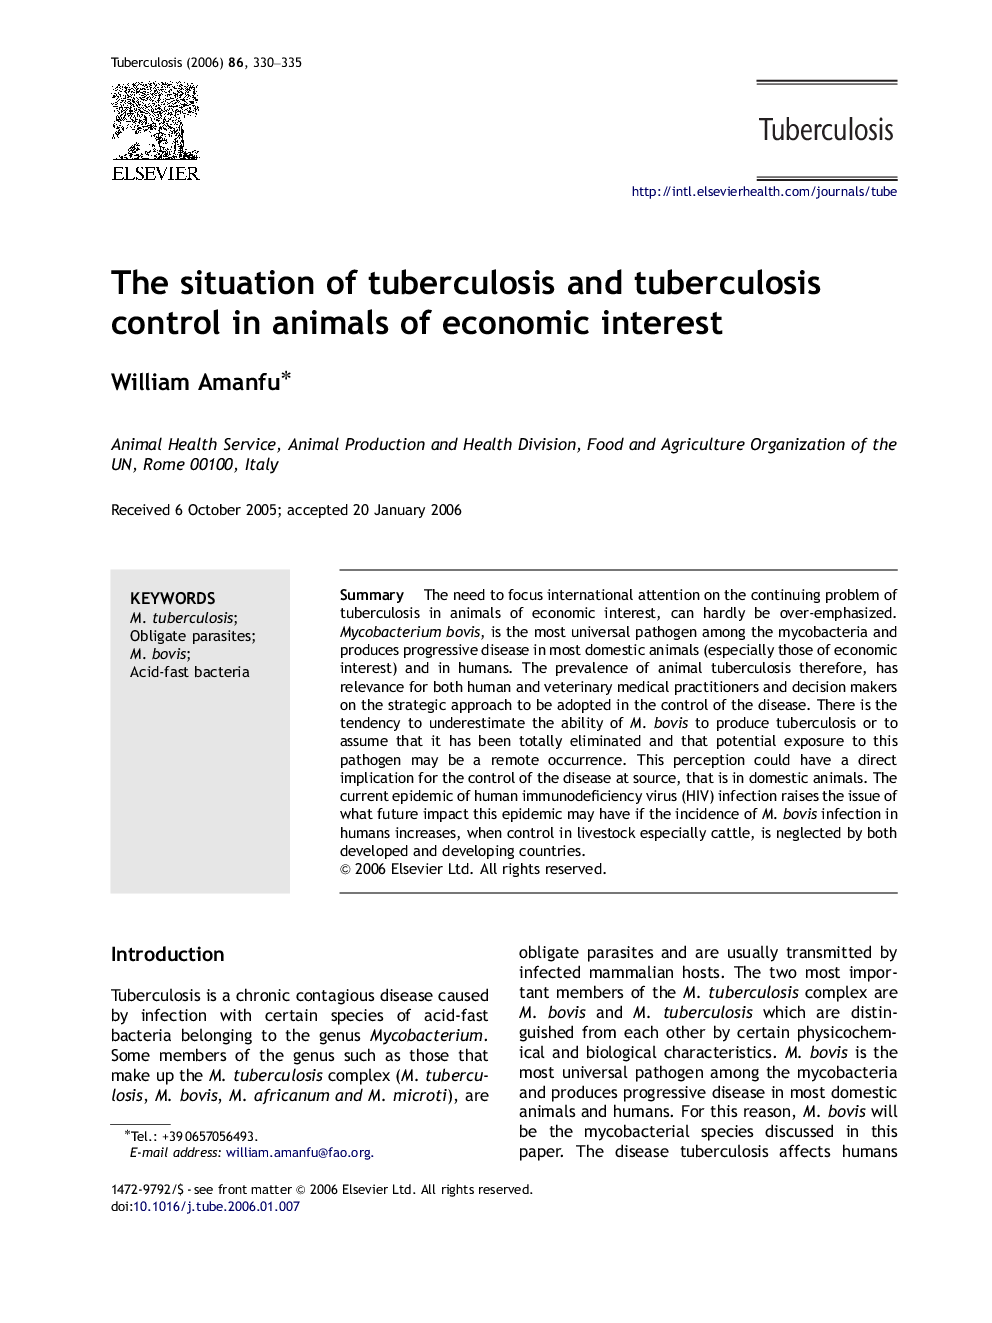 The situation of tuberculosis and tuberculosis control in animals of economic interest